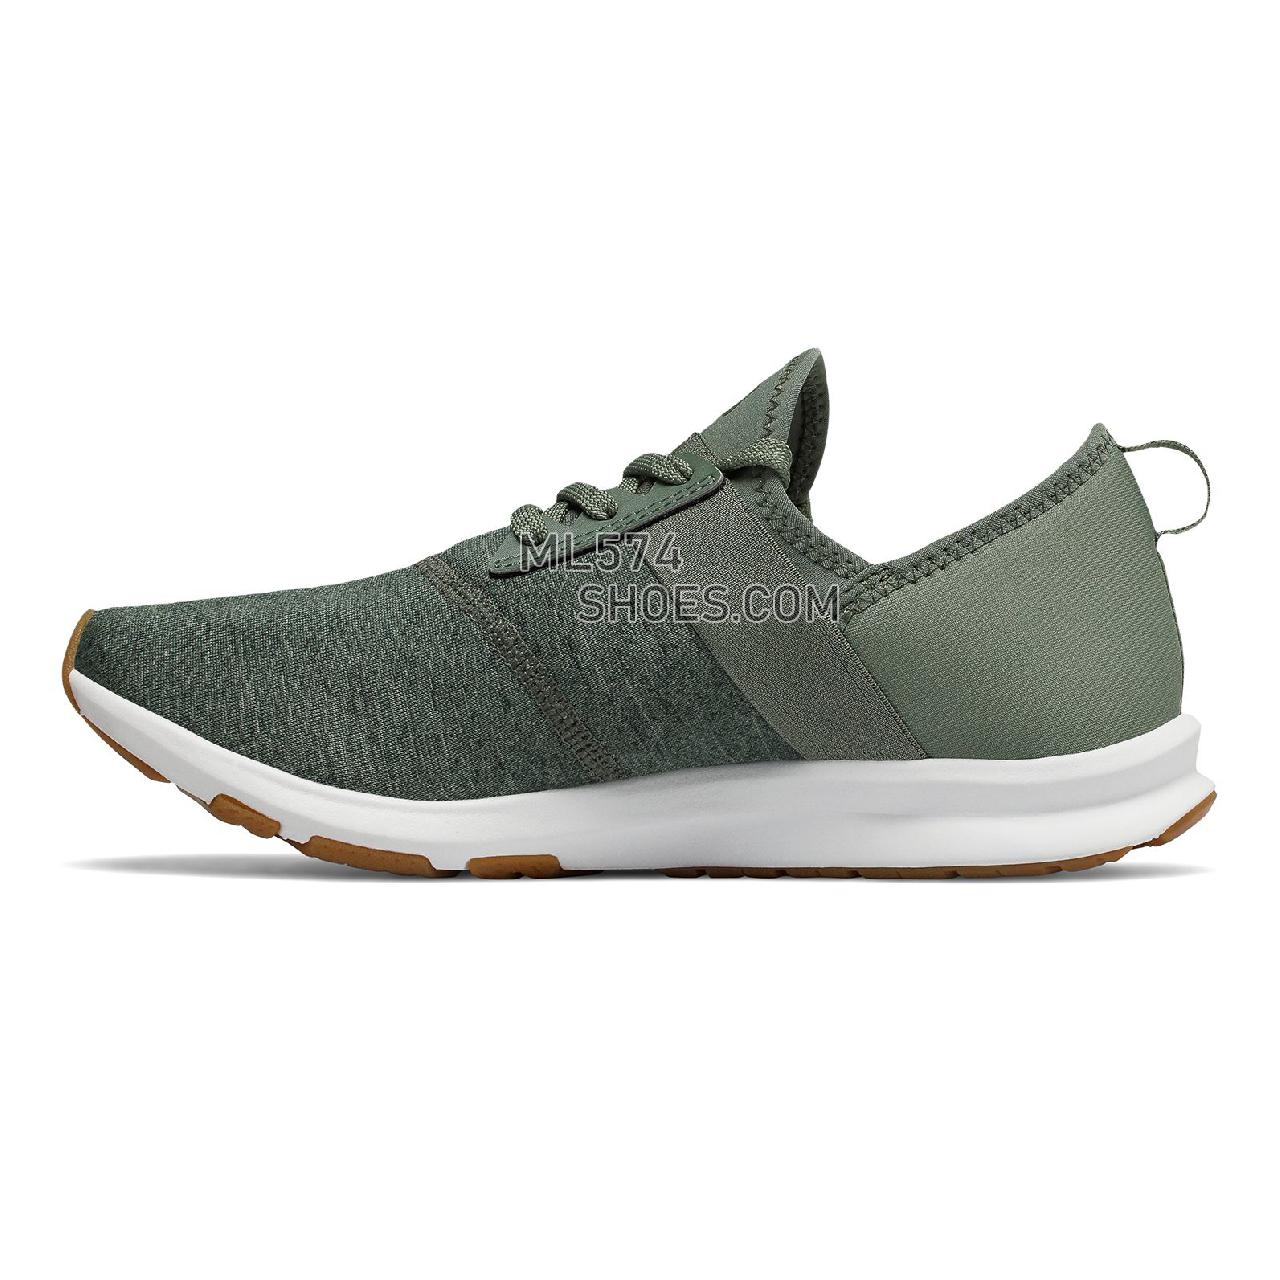 New Balance FuelCore NERGIZE - Women's  - X-training Vintage Cedar with White - WXNRGGR